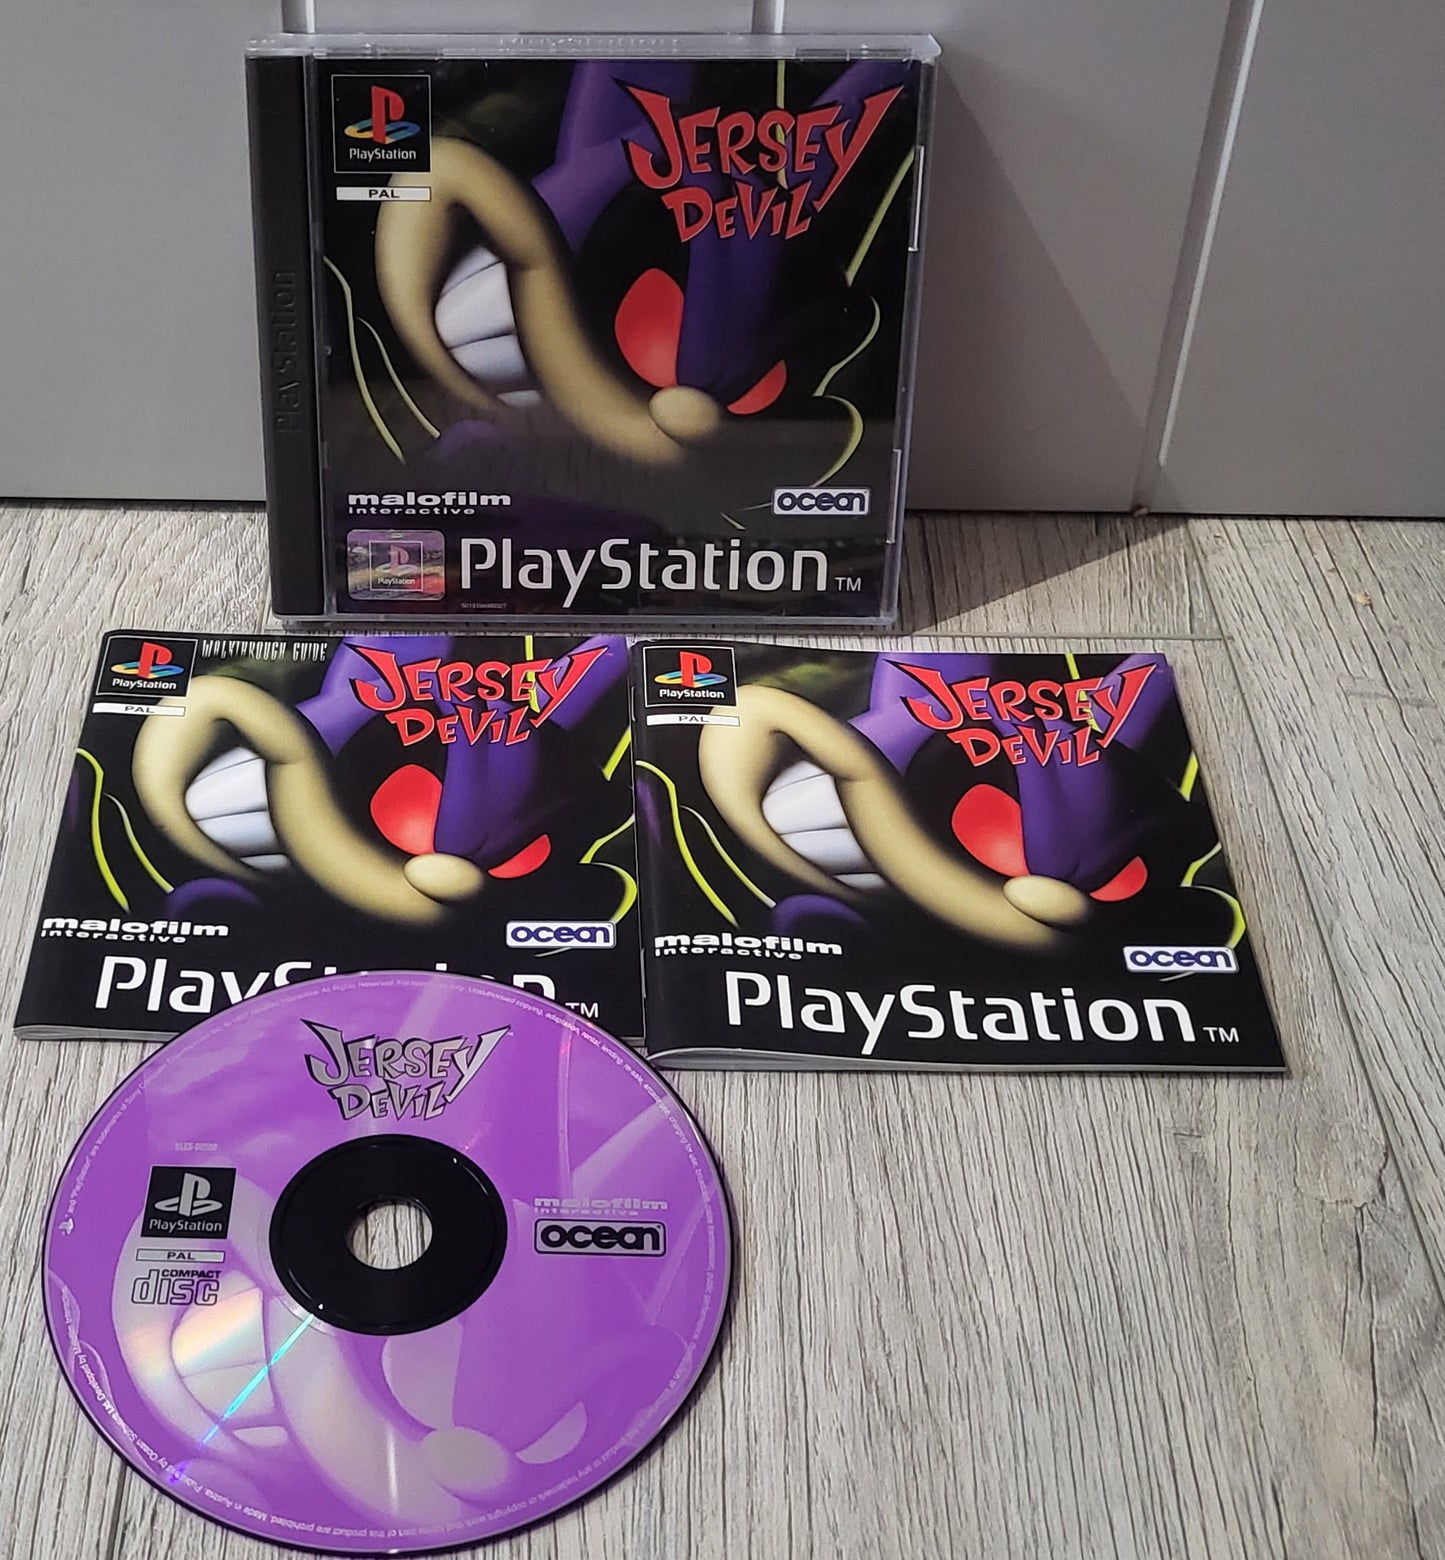 Jersey Devil includes walkthrough guide Sony Playstation 1 (PS1) Game